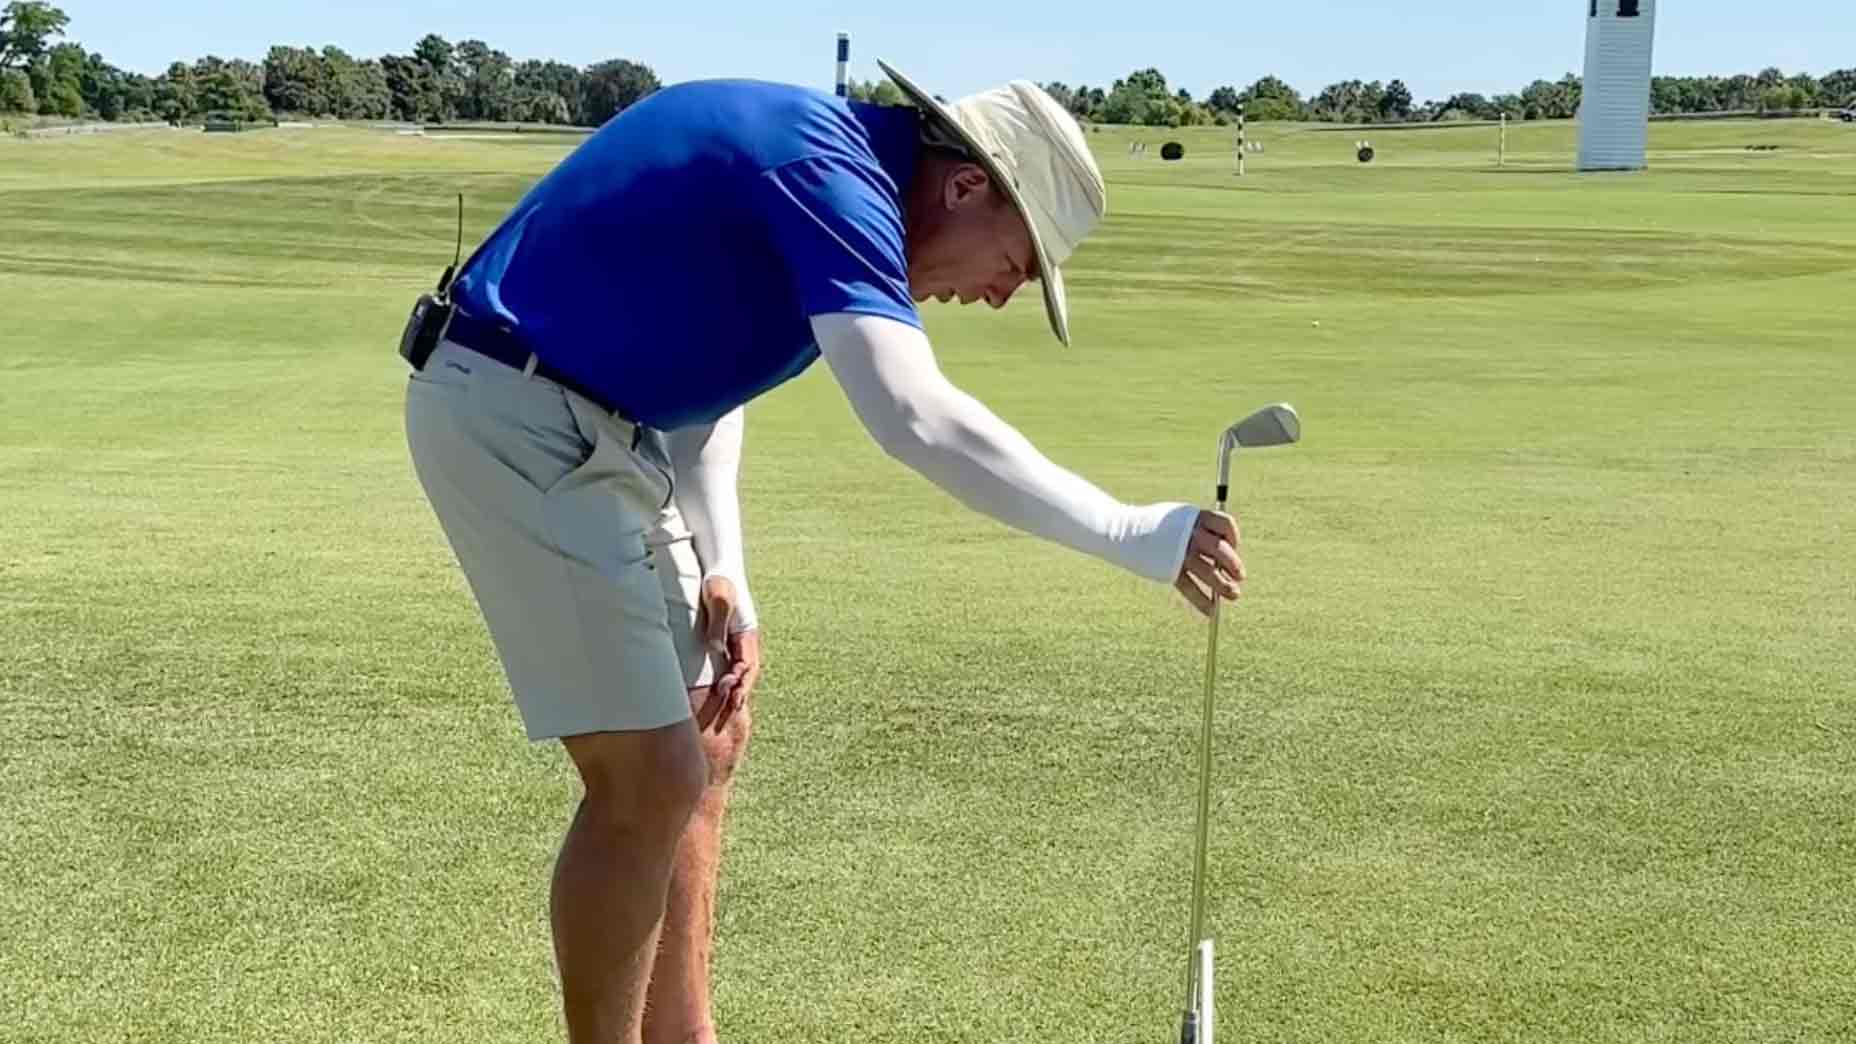 Wondering how to fix a slice in golf? Top teacher Andrew Rice shares a simple drill that uses an alignment rod to help cure the issue